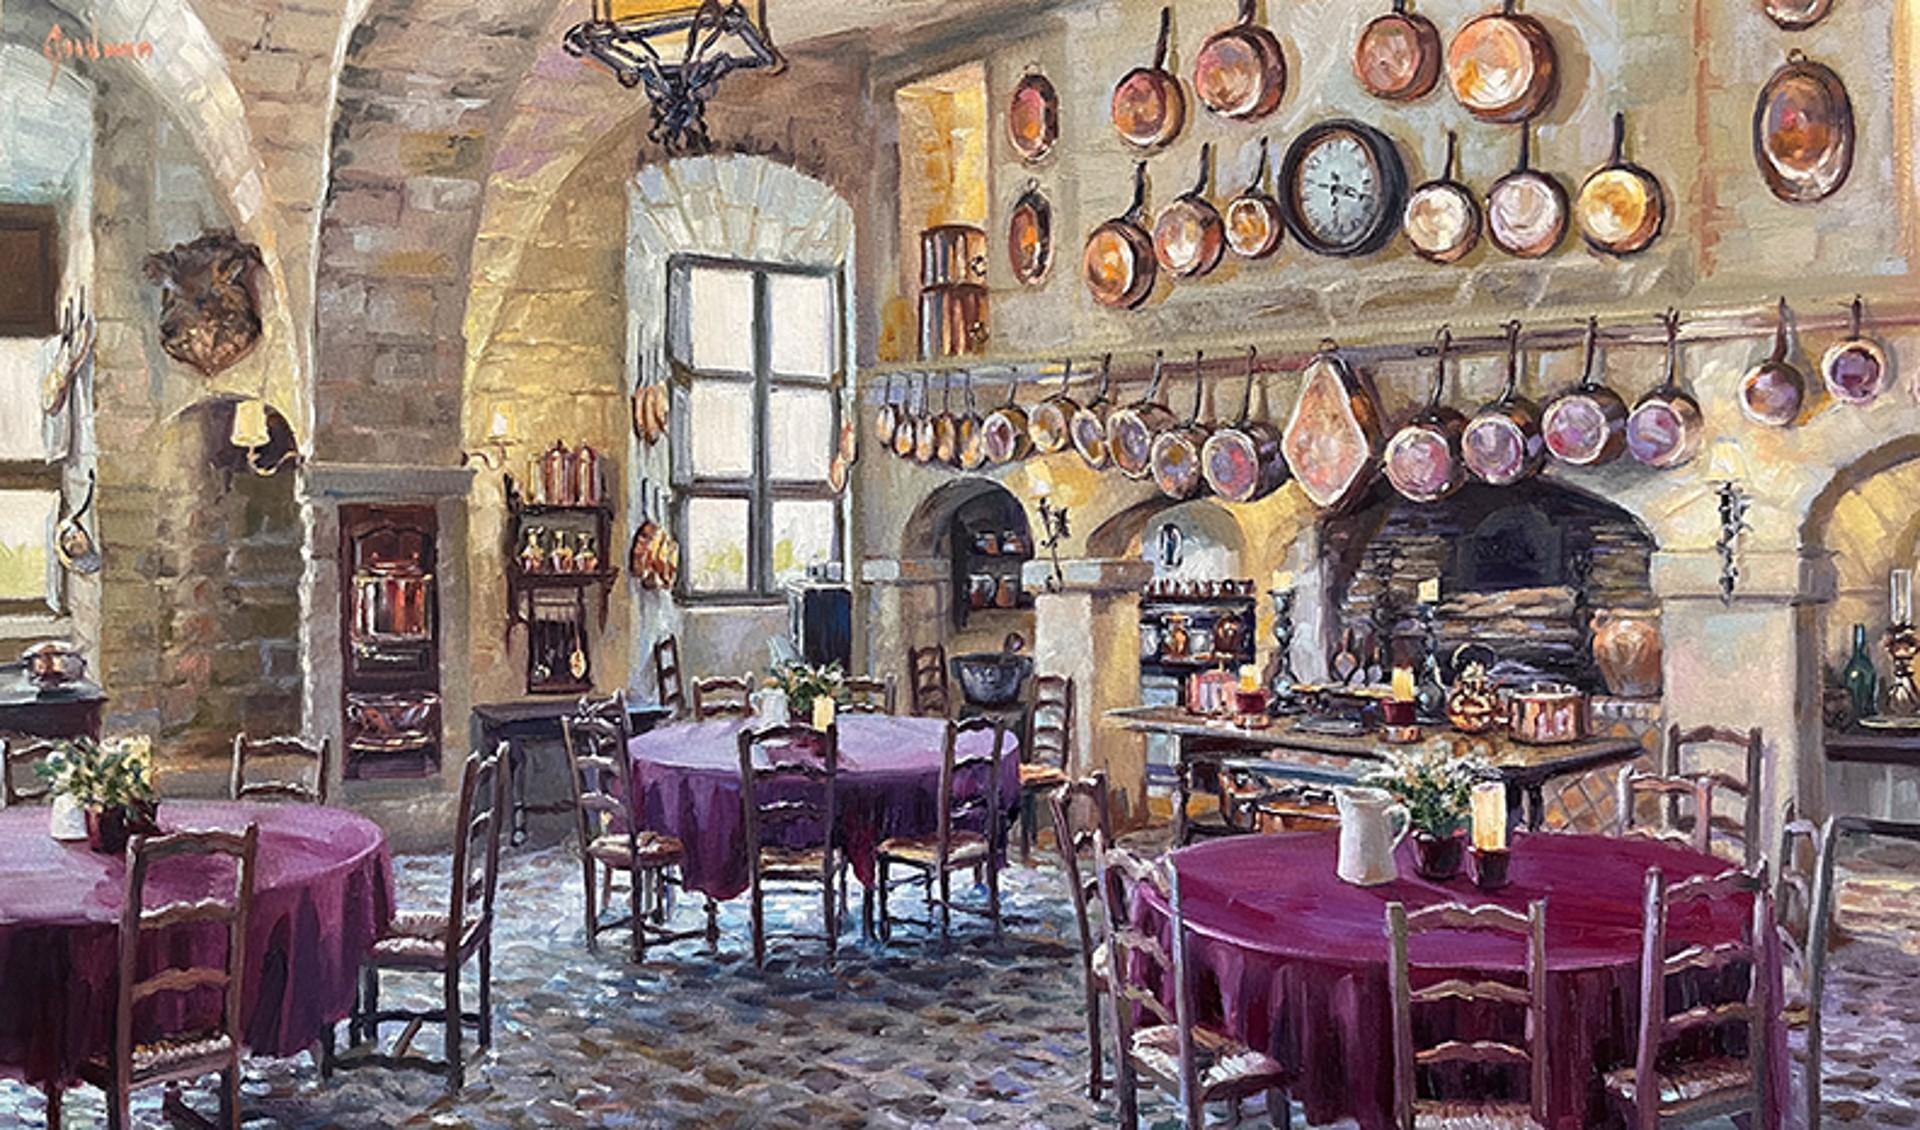 Copper Dining at Chateau de Brissac Winery, France by Lindsay Goodwin